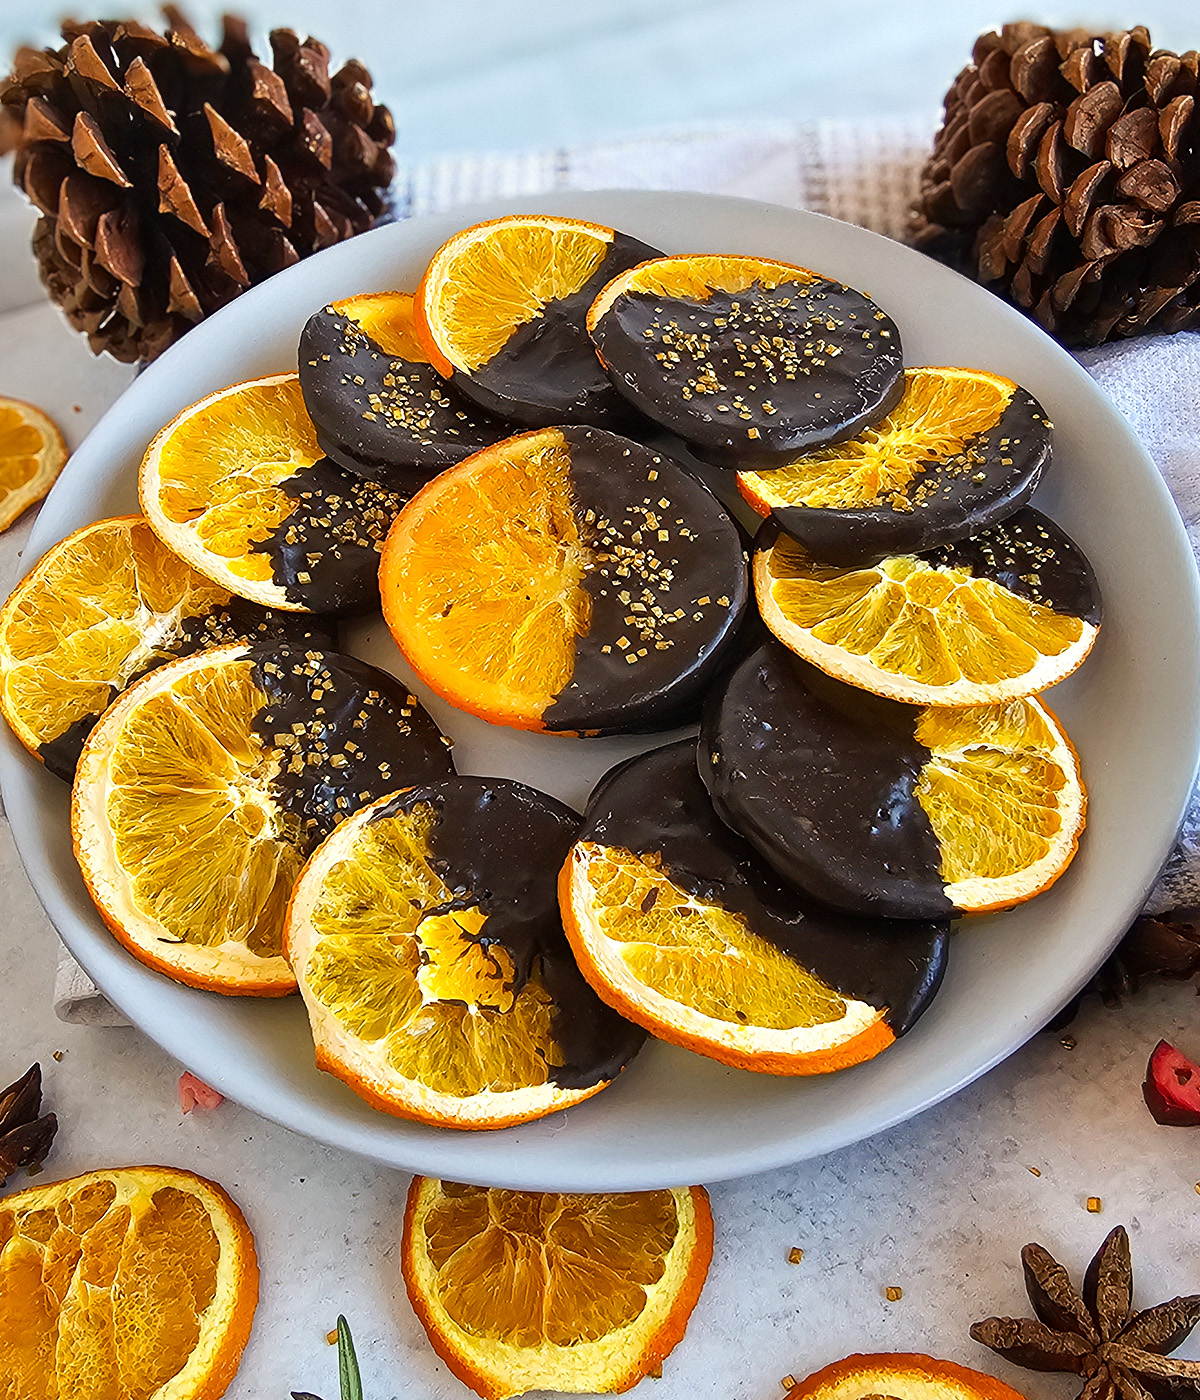 A plate with chocolate covered oranges and pine cones.